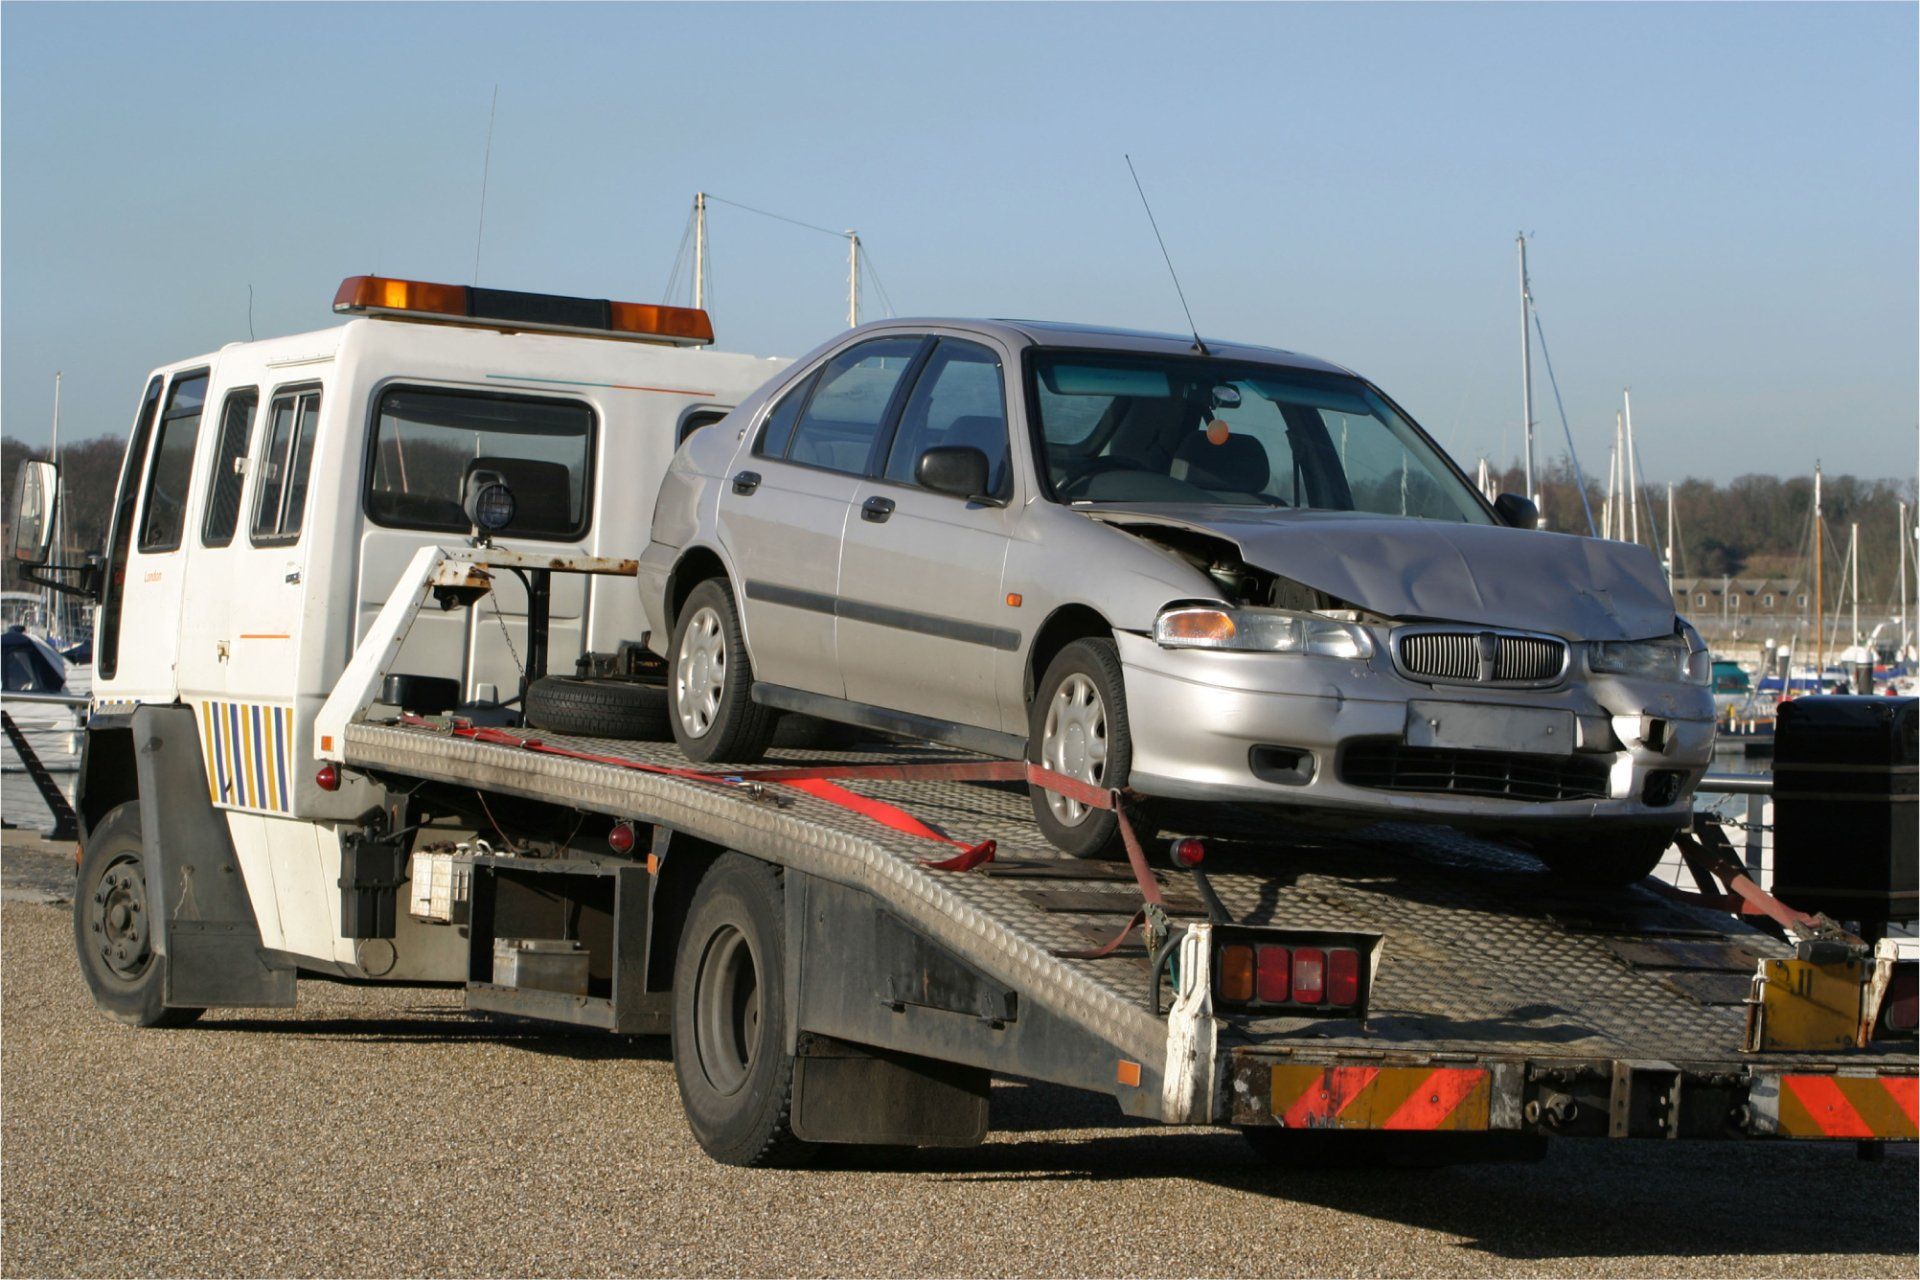 A silver car is being towed by a tow truck.